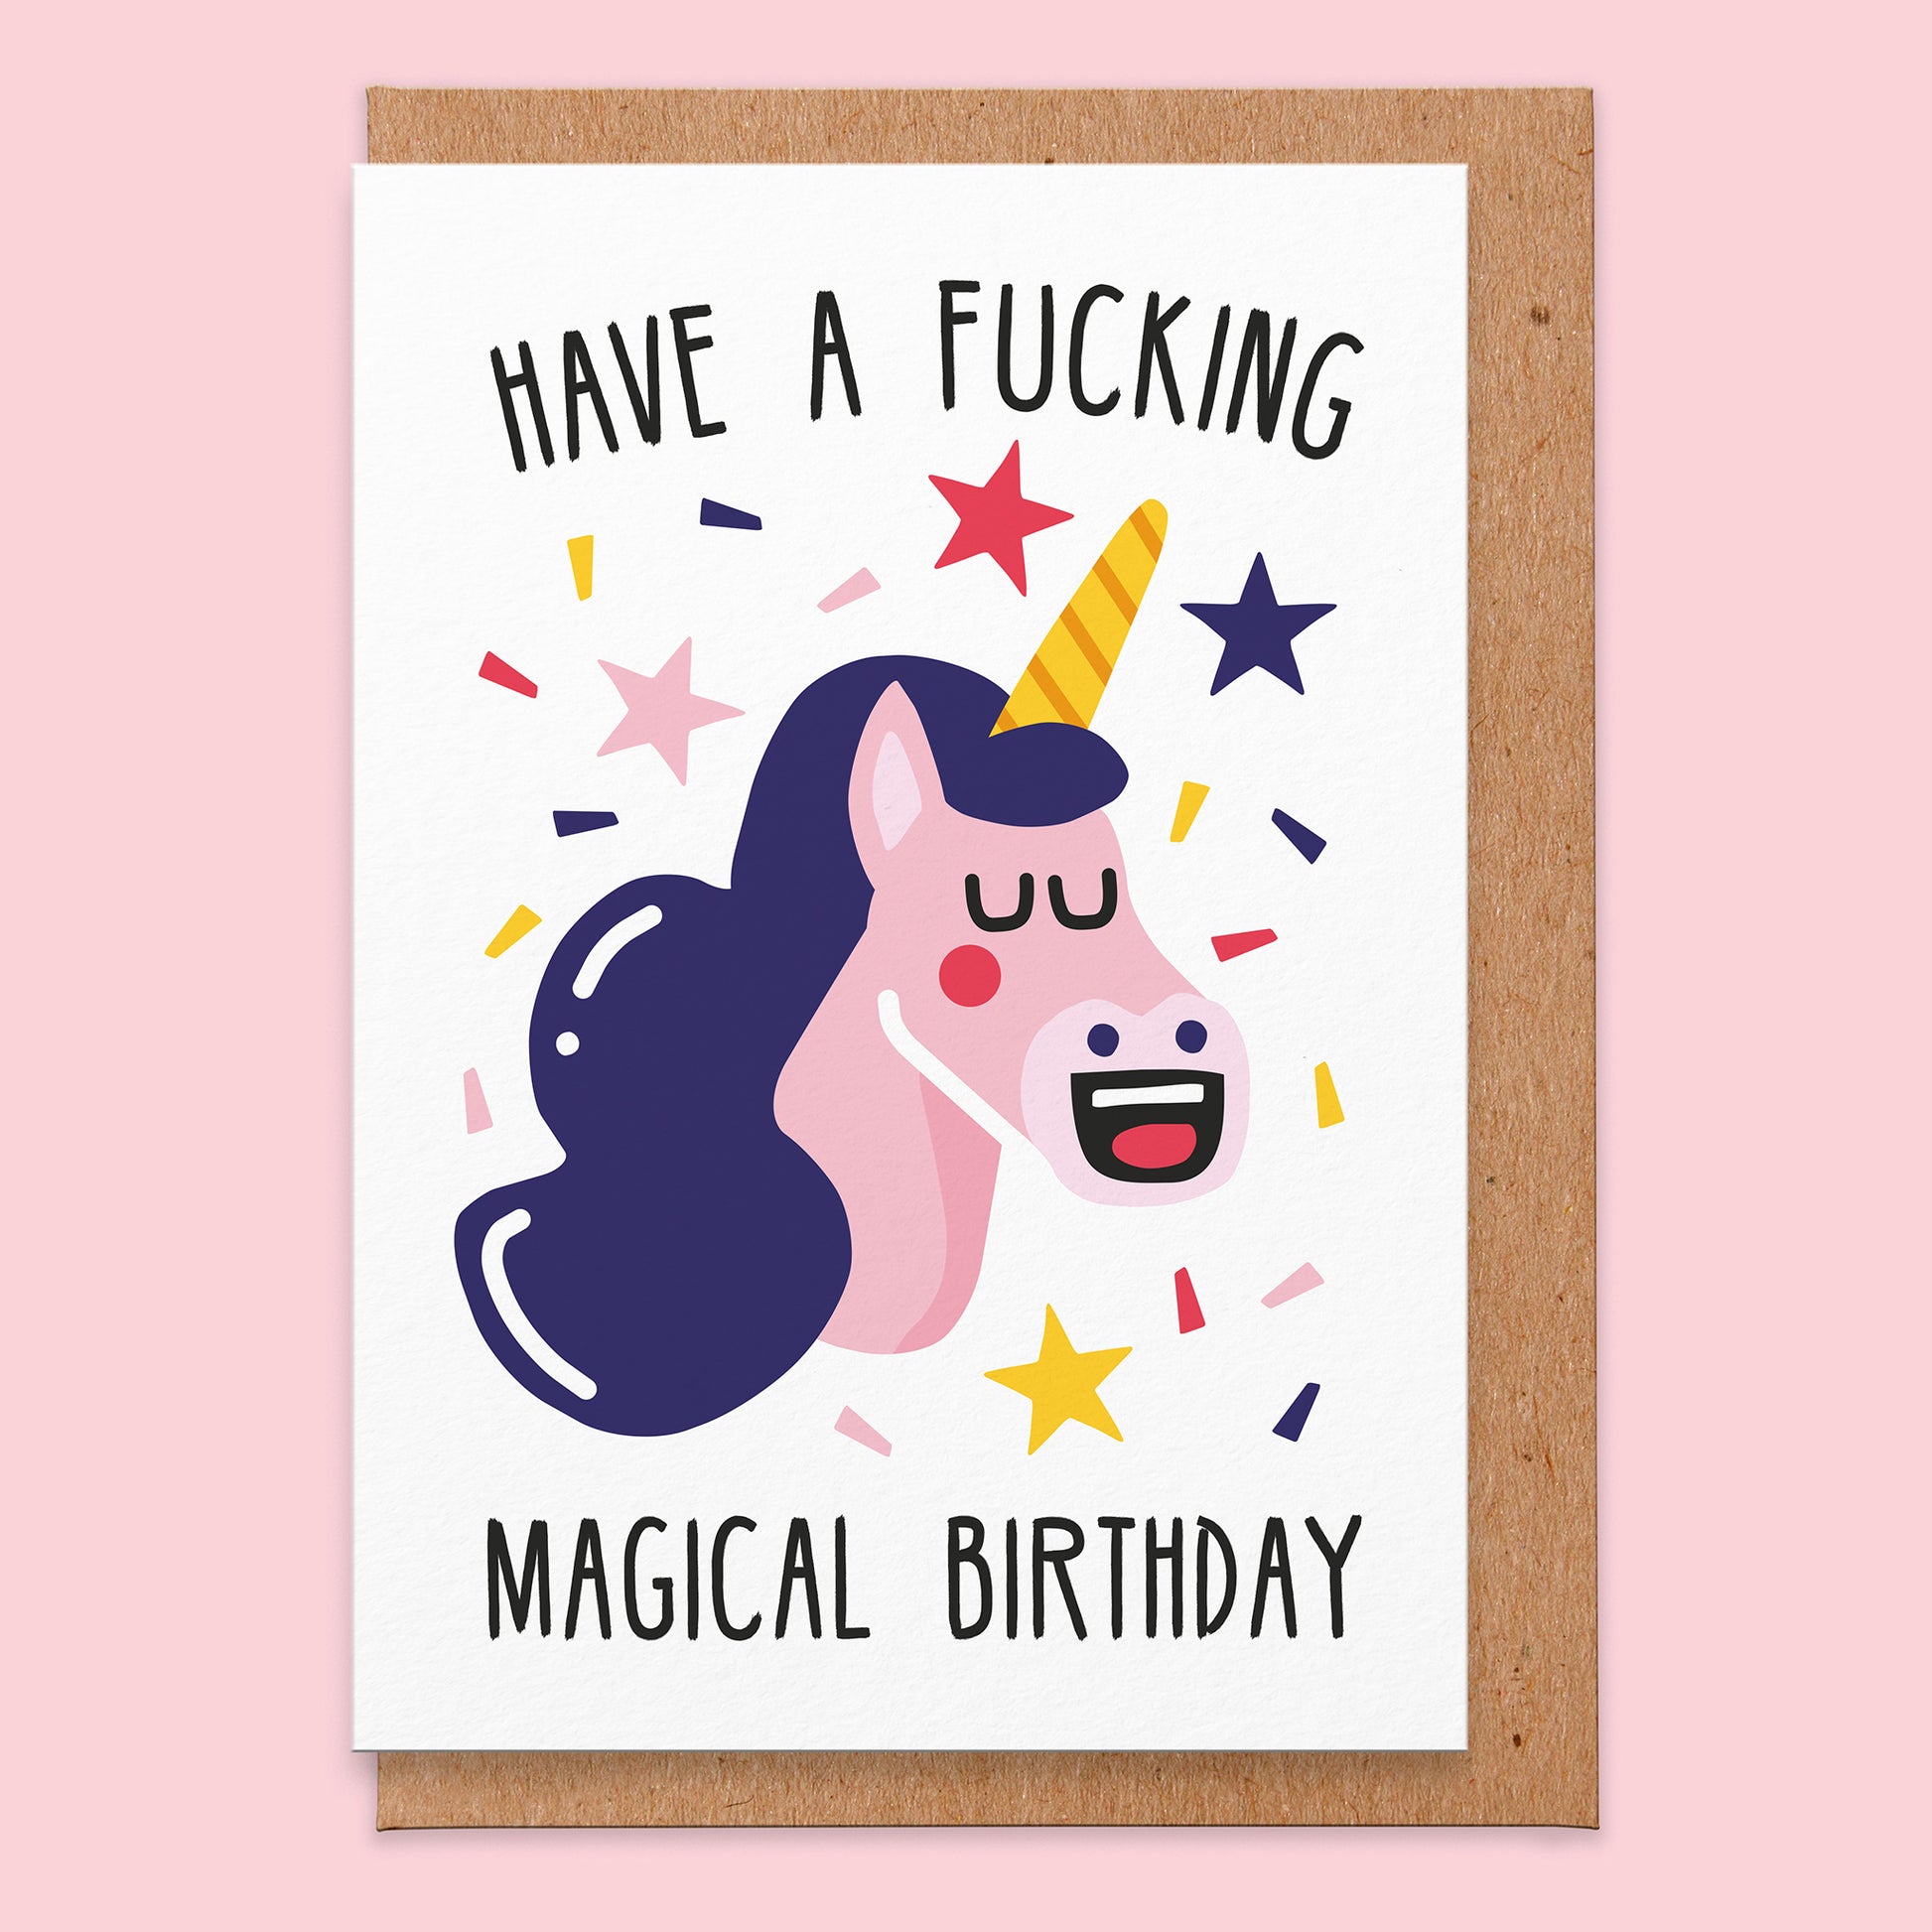 Birthday card that reads have a fucking magical birthday with an illustration of a unicorn.